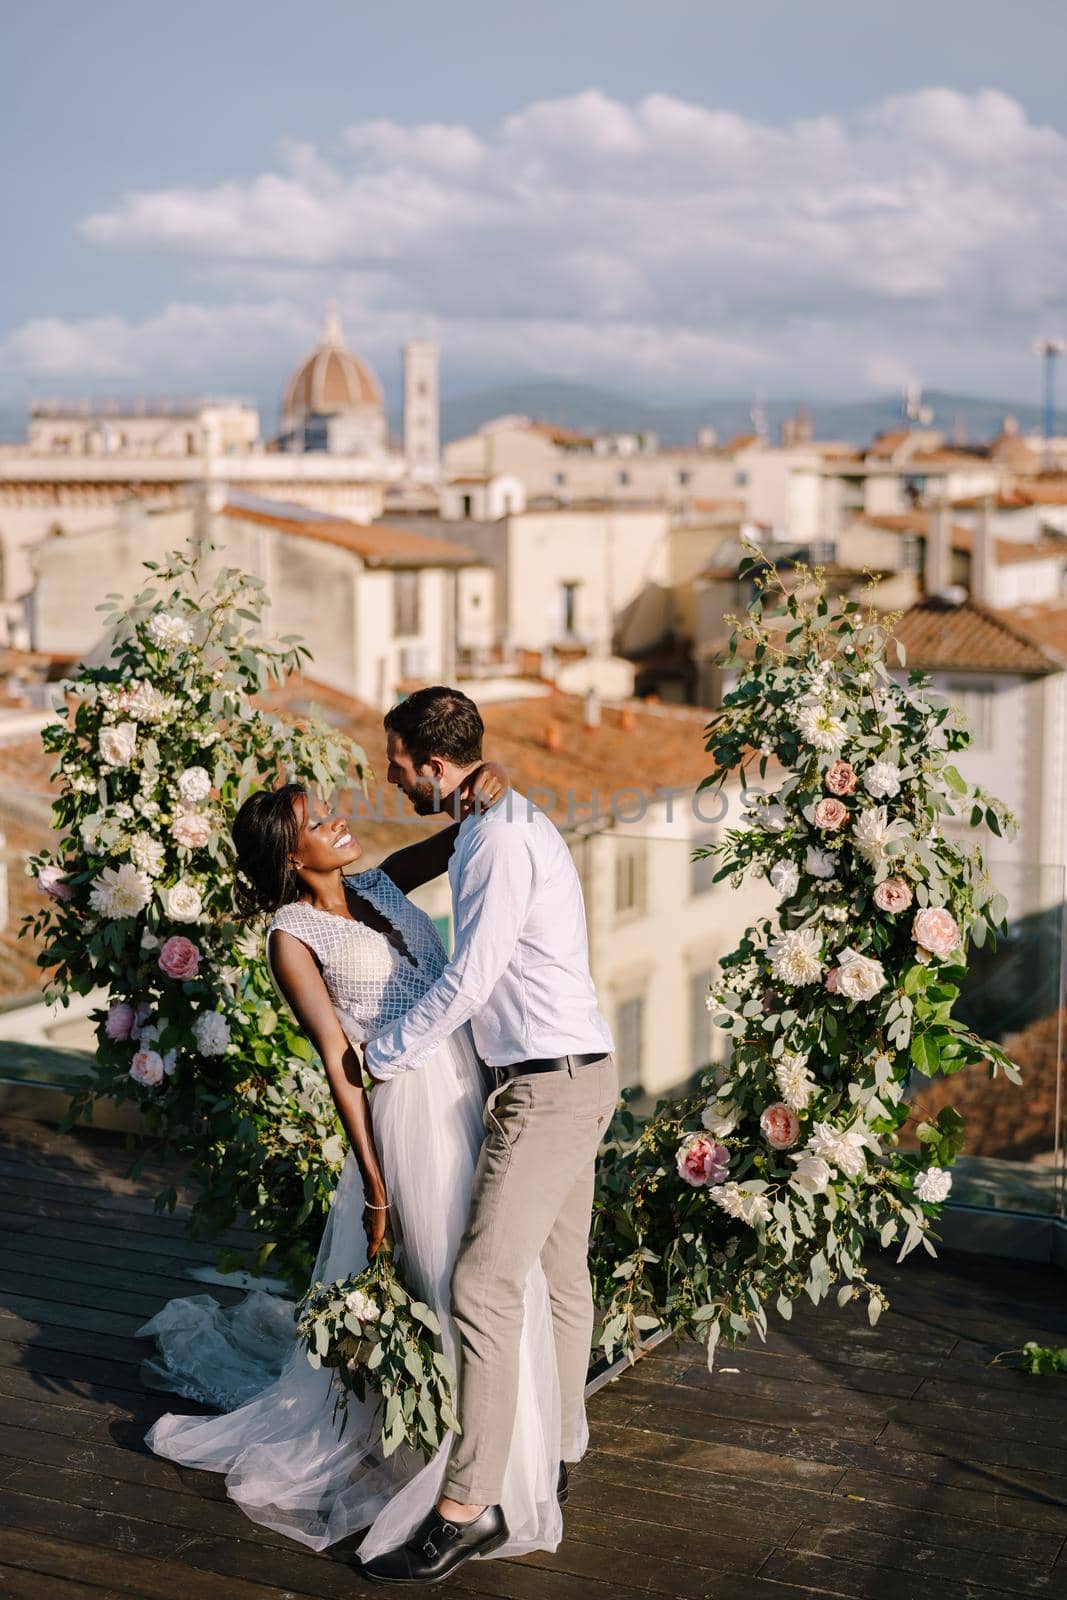 Multiracial wedding couple. Destination fine-art wedding in Florence, Italy. A wedding ceremony on the roof of the building, with cityscape views of the city and the Cathedral of Santa Maria Del Fiore by Nadtochiy